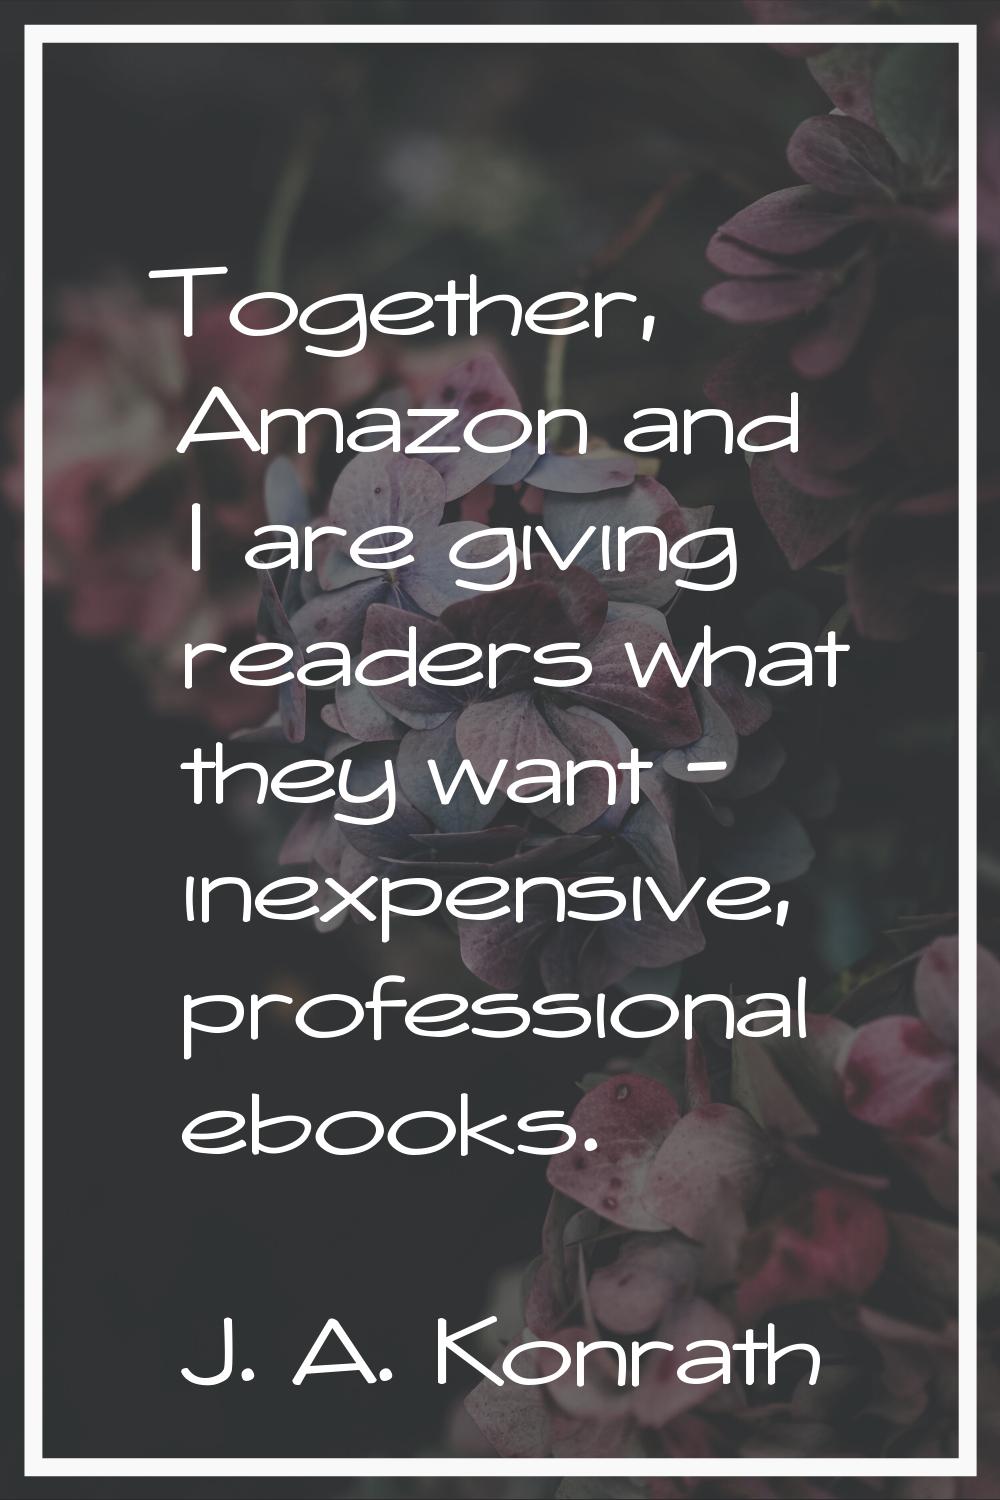 Together, Amazon and I are giving readers what they want - inexpensive, professional ebooks.